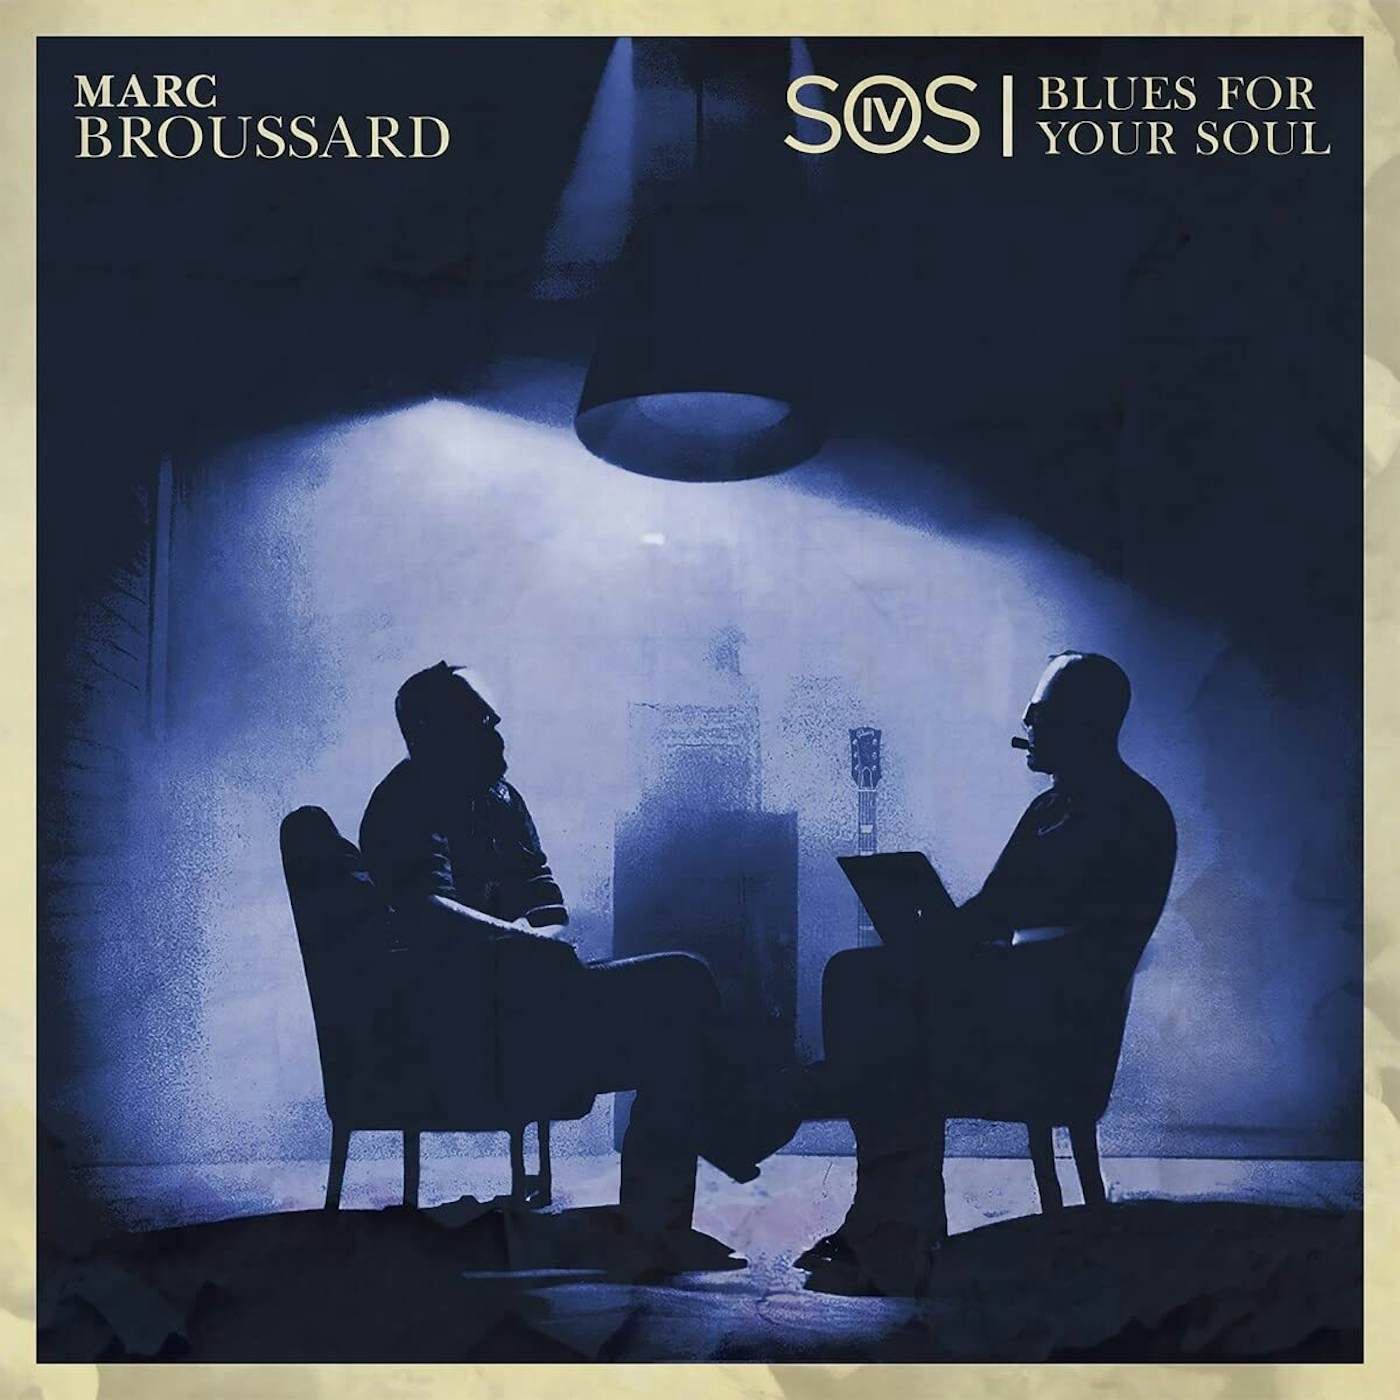 Marc Broussard S.O.S. 4: BLUES FOR YOUR SOUL CD